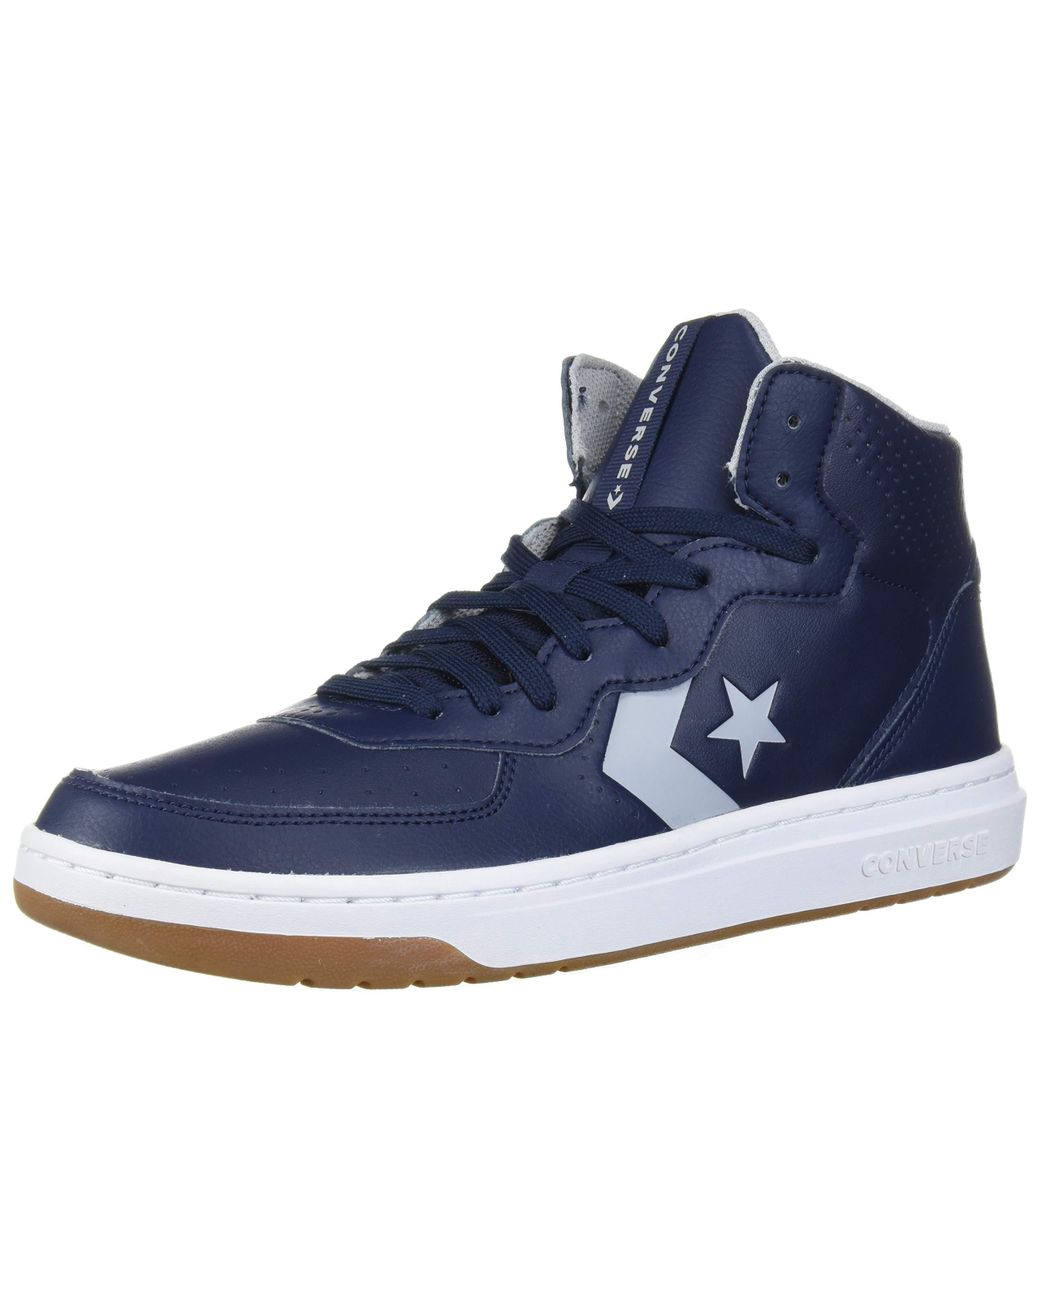 Converse Rival Leather Mid Top Sneaker in Blue - Lyst